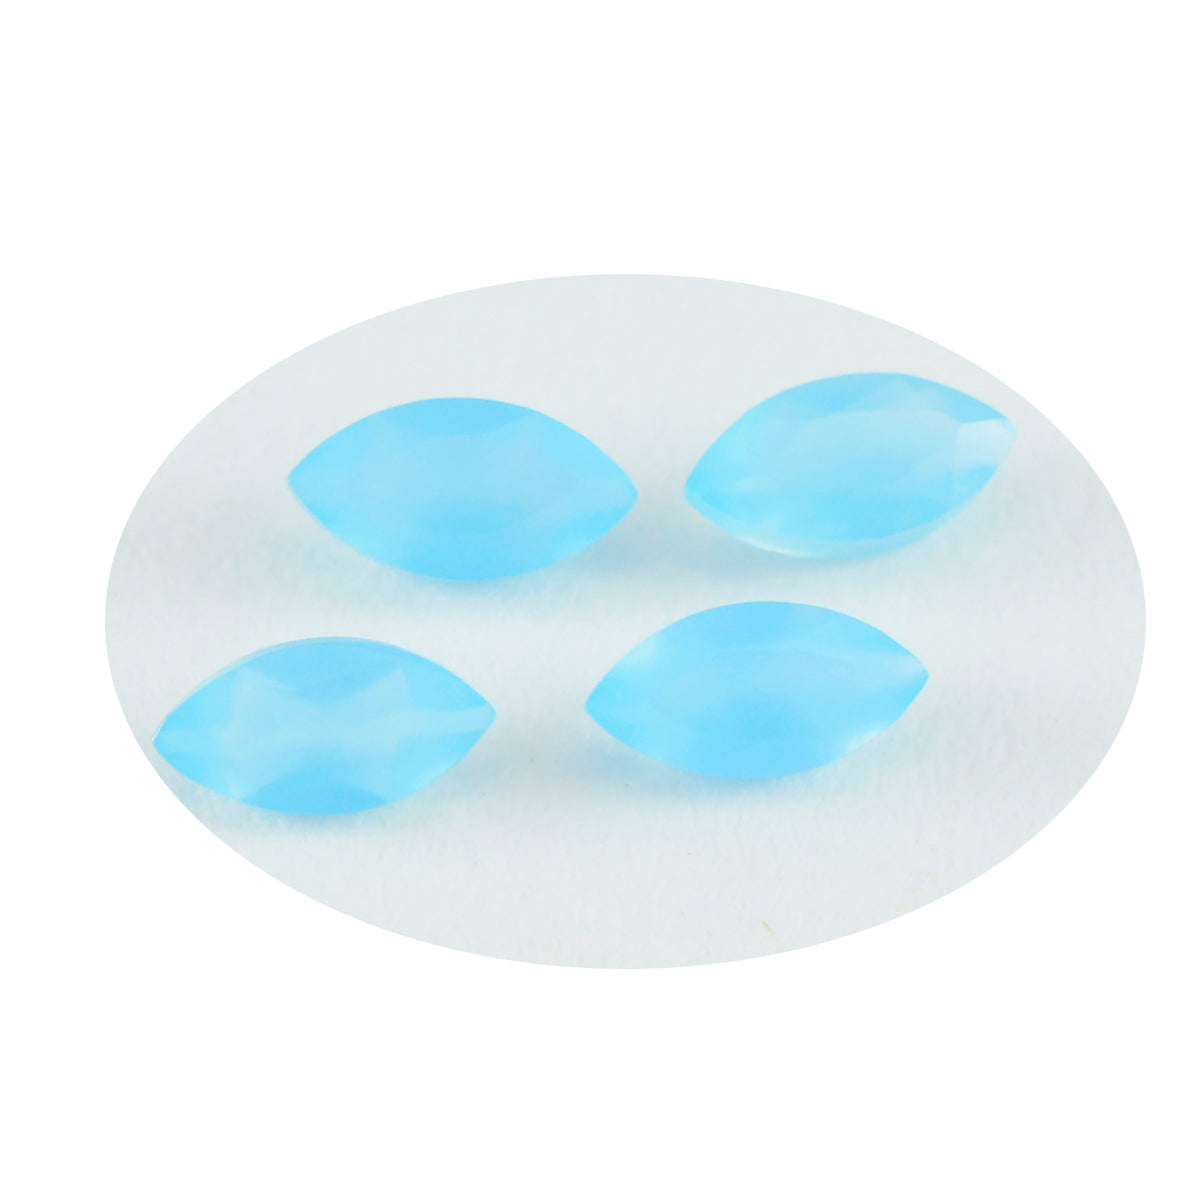 Riyogems 1PC Genuine Blue Chalcedony Faceted 6x12 mm Marquise Shape A+ Quality Loose Stone